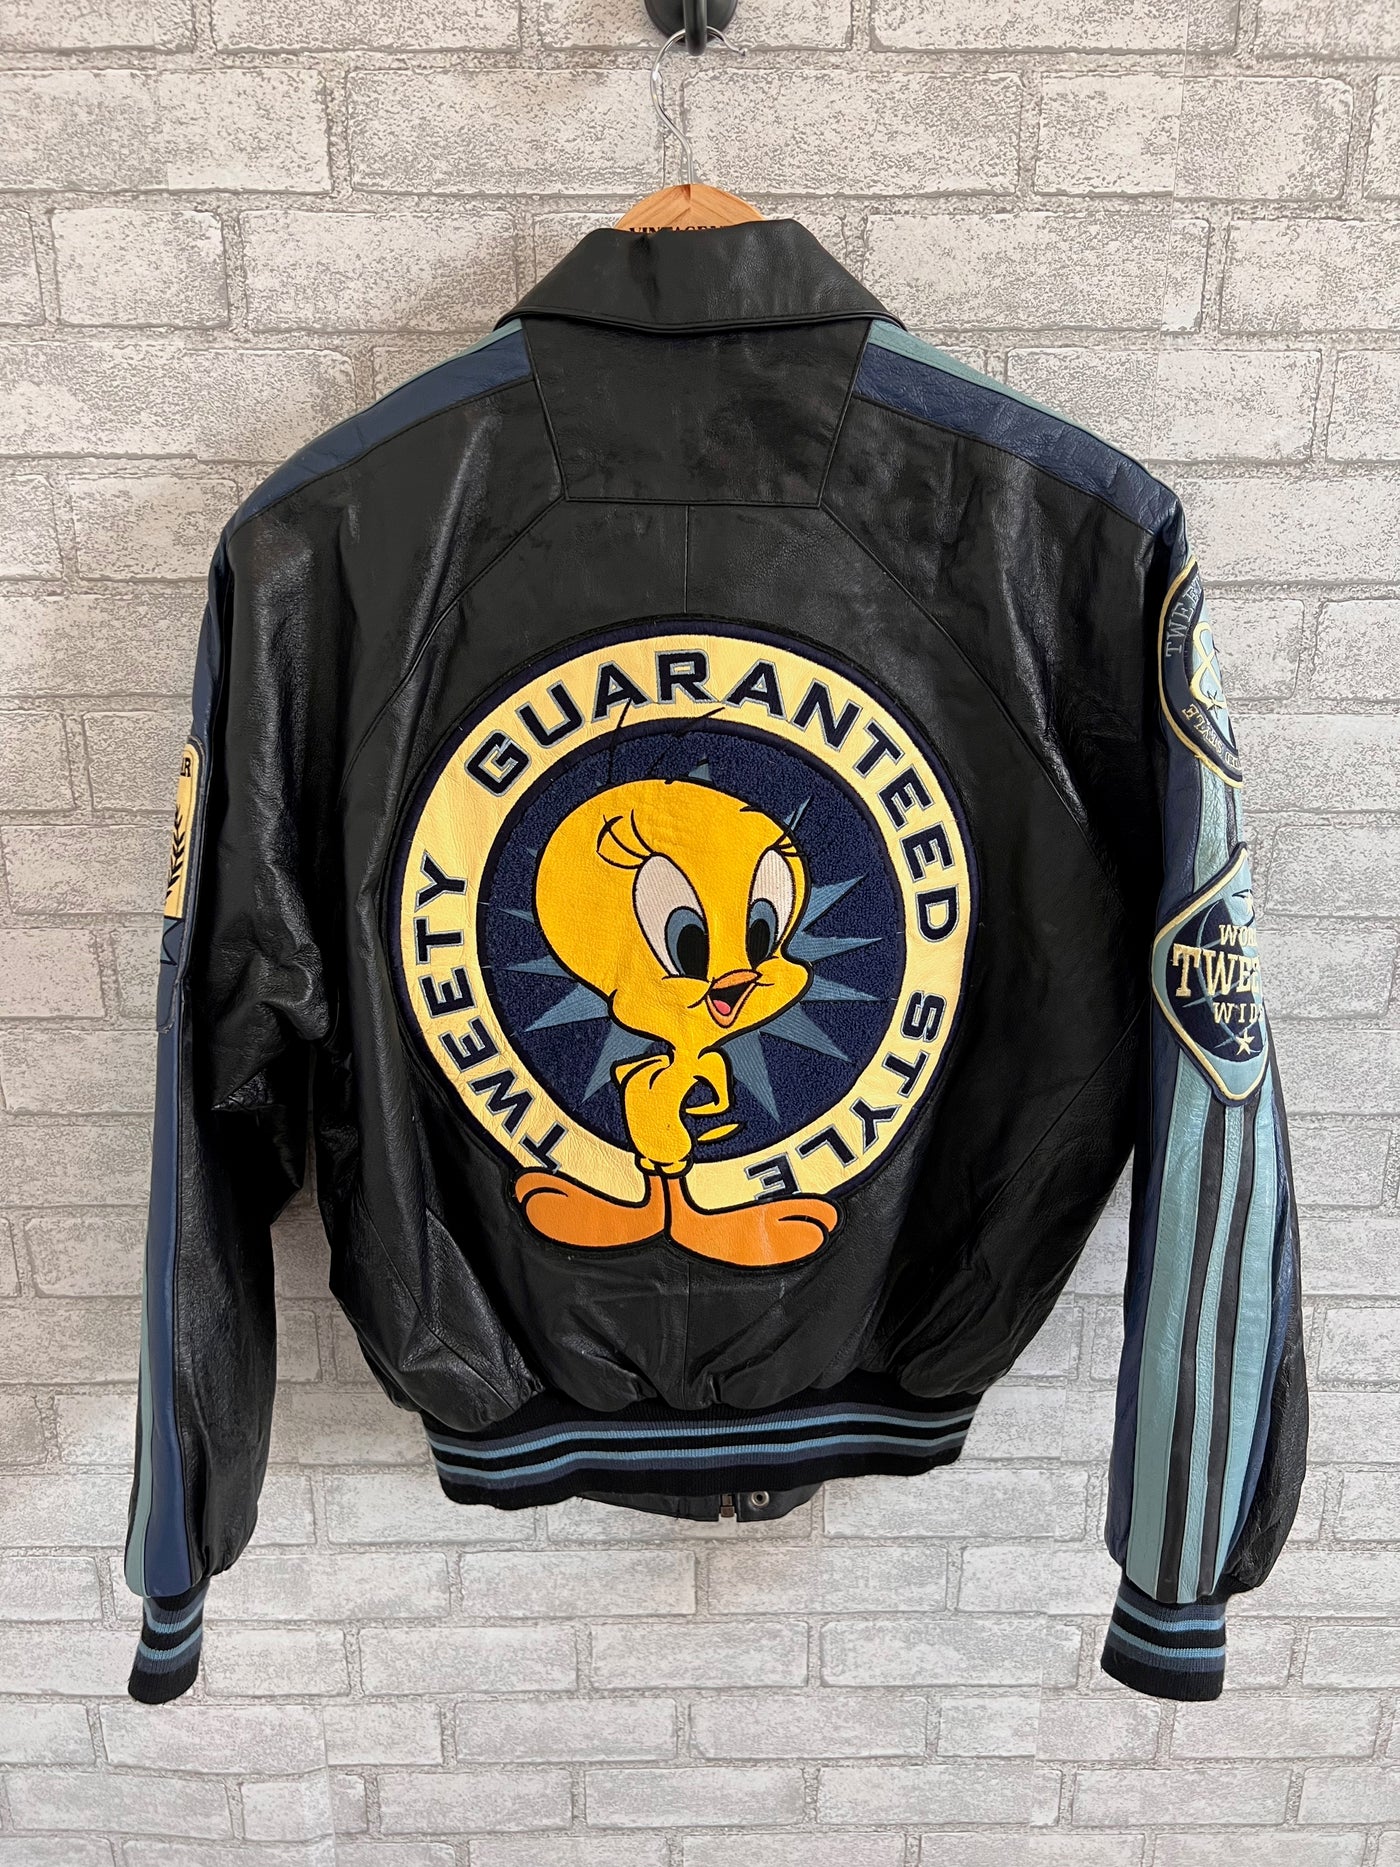 Vintage Classic Looney Tunes 1998 Tweety Leather Jacket. Size Small.